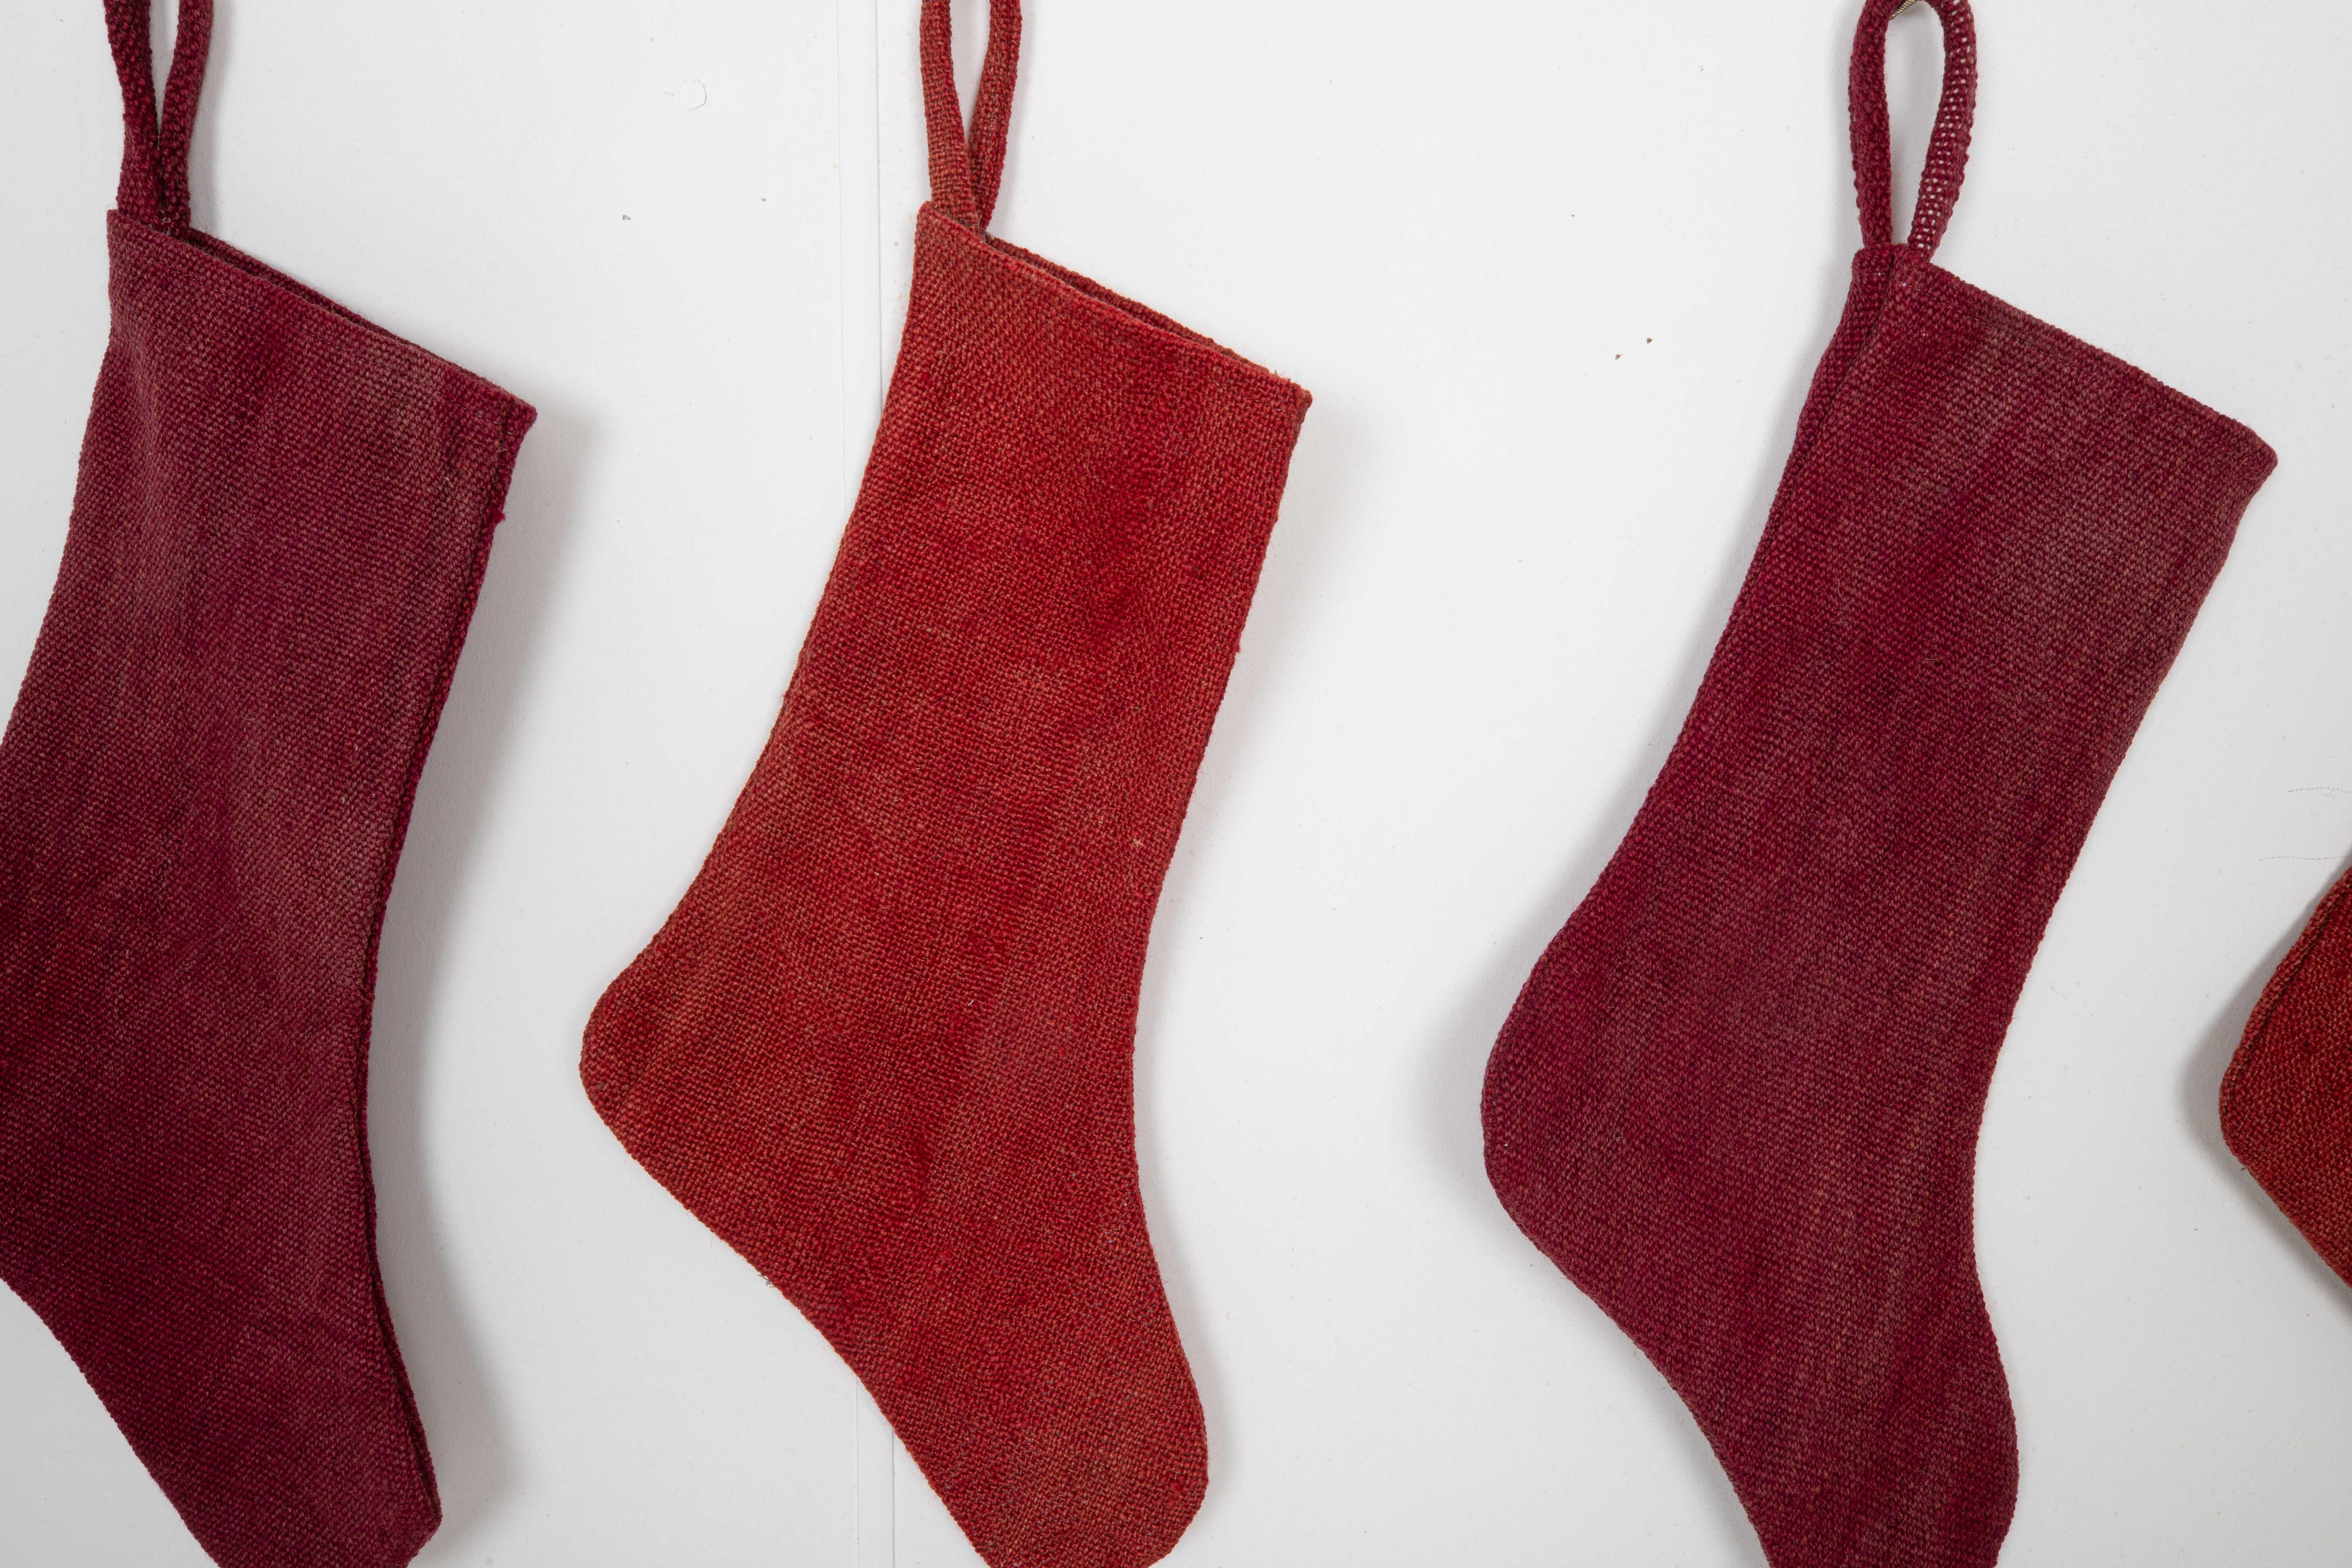 Turkish A set of 5 (five) Christmas Stocking Made from Anatolıan Perde Rug Fragments For Sale